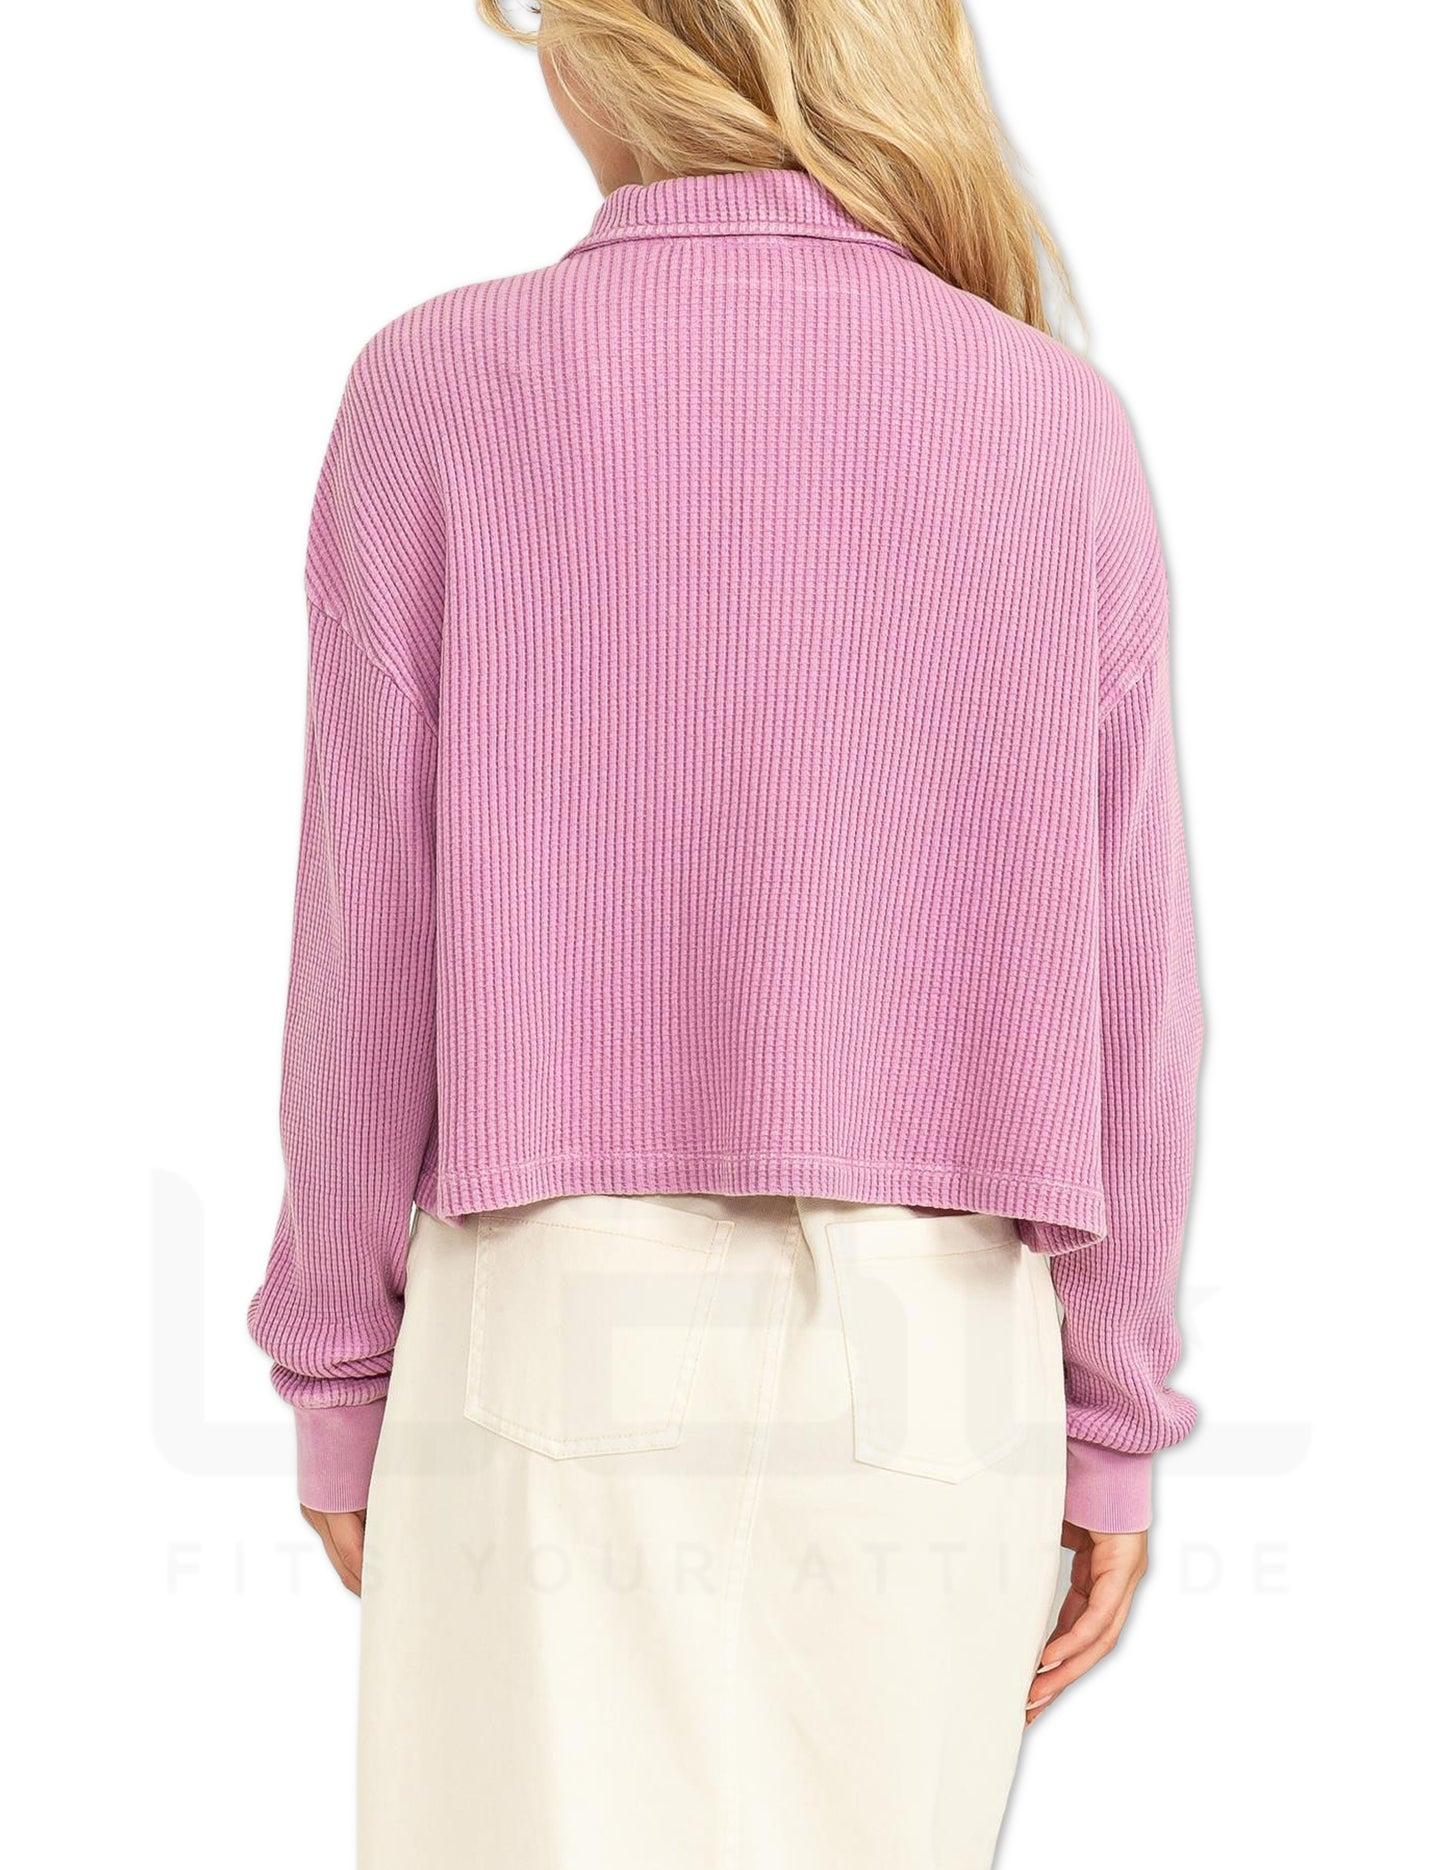 Collared Button Front Top - Vintage Plum